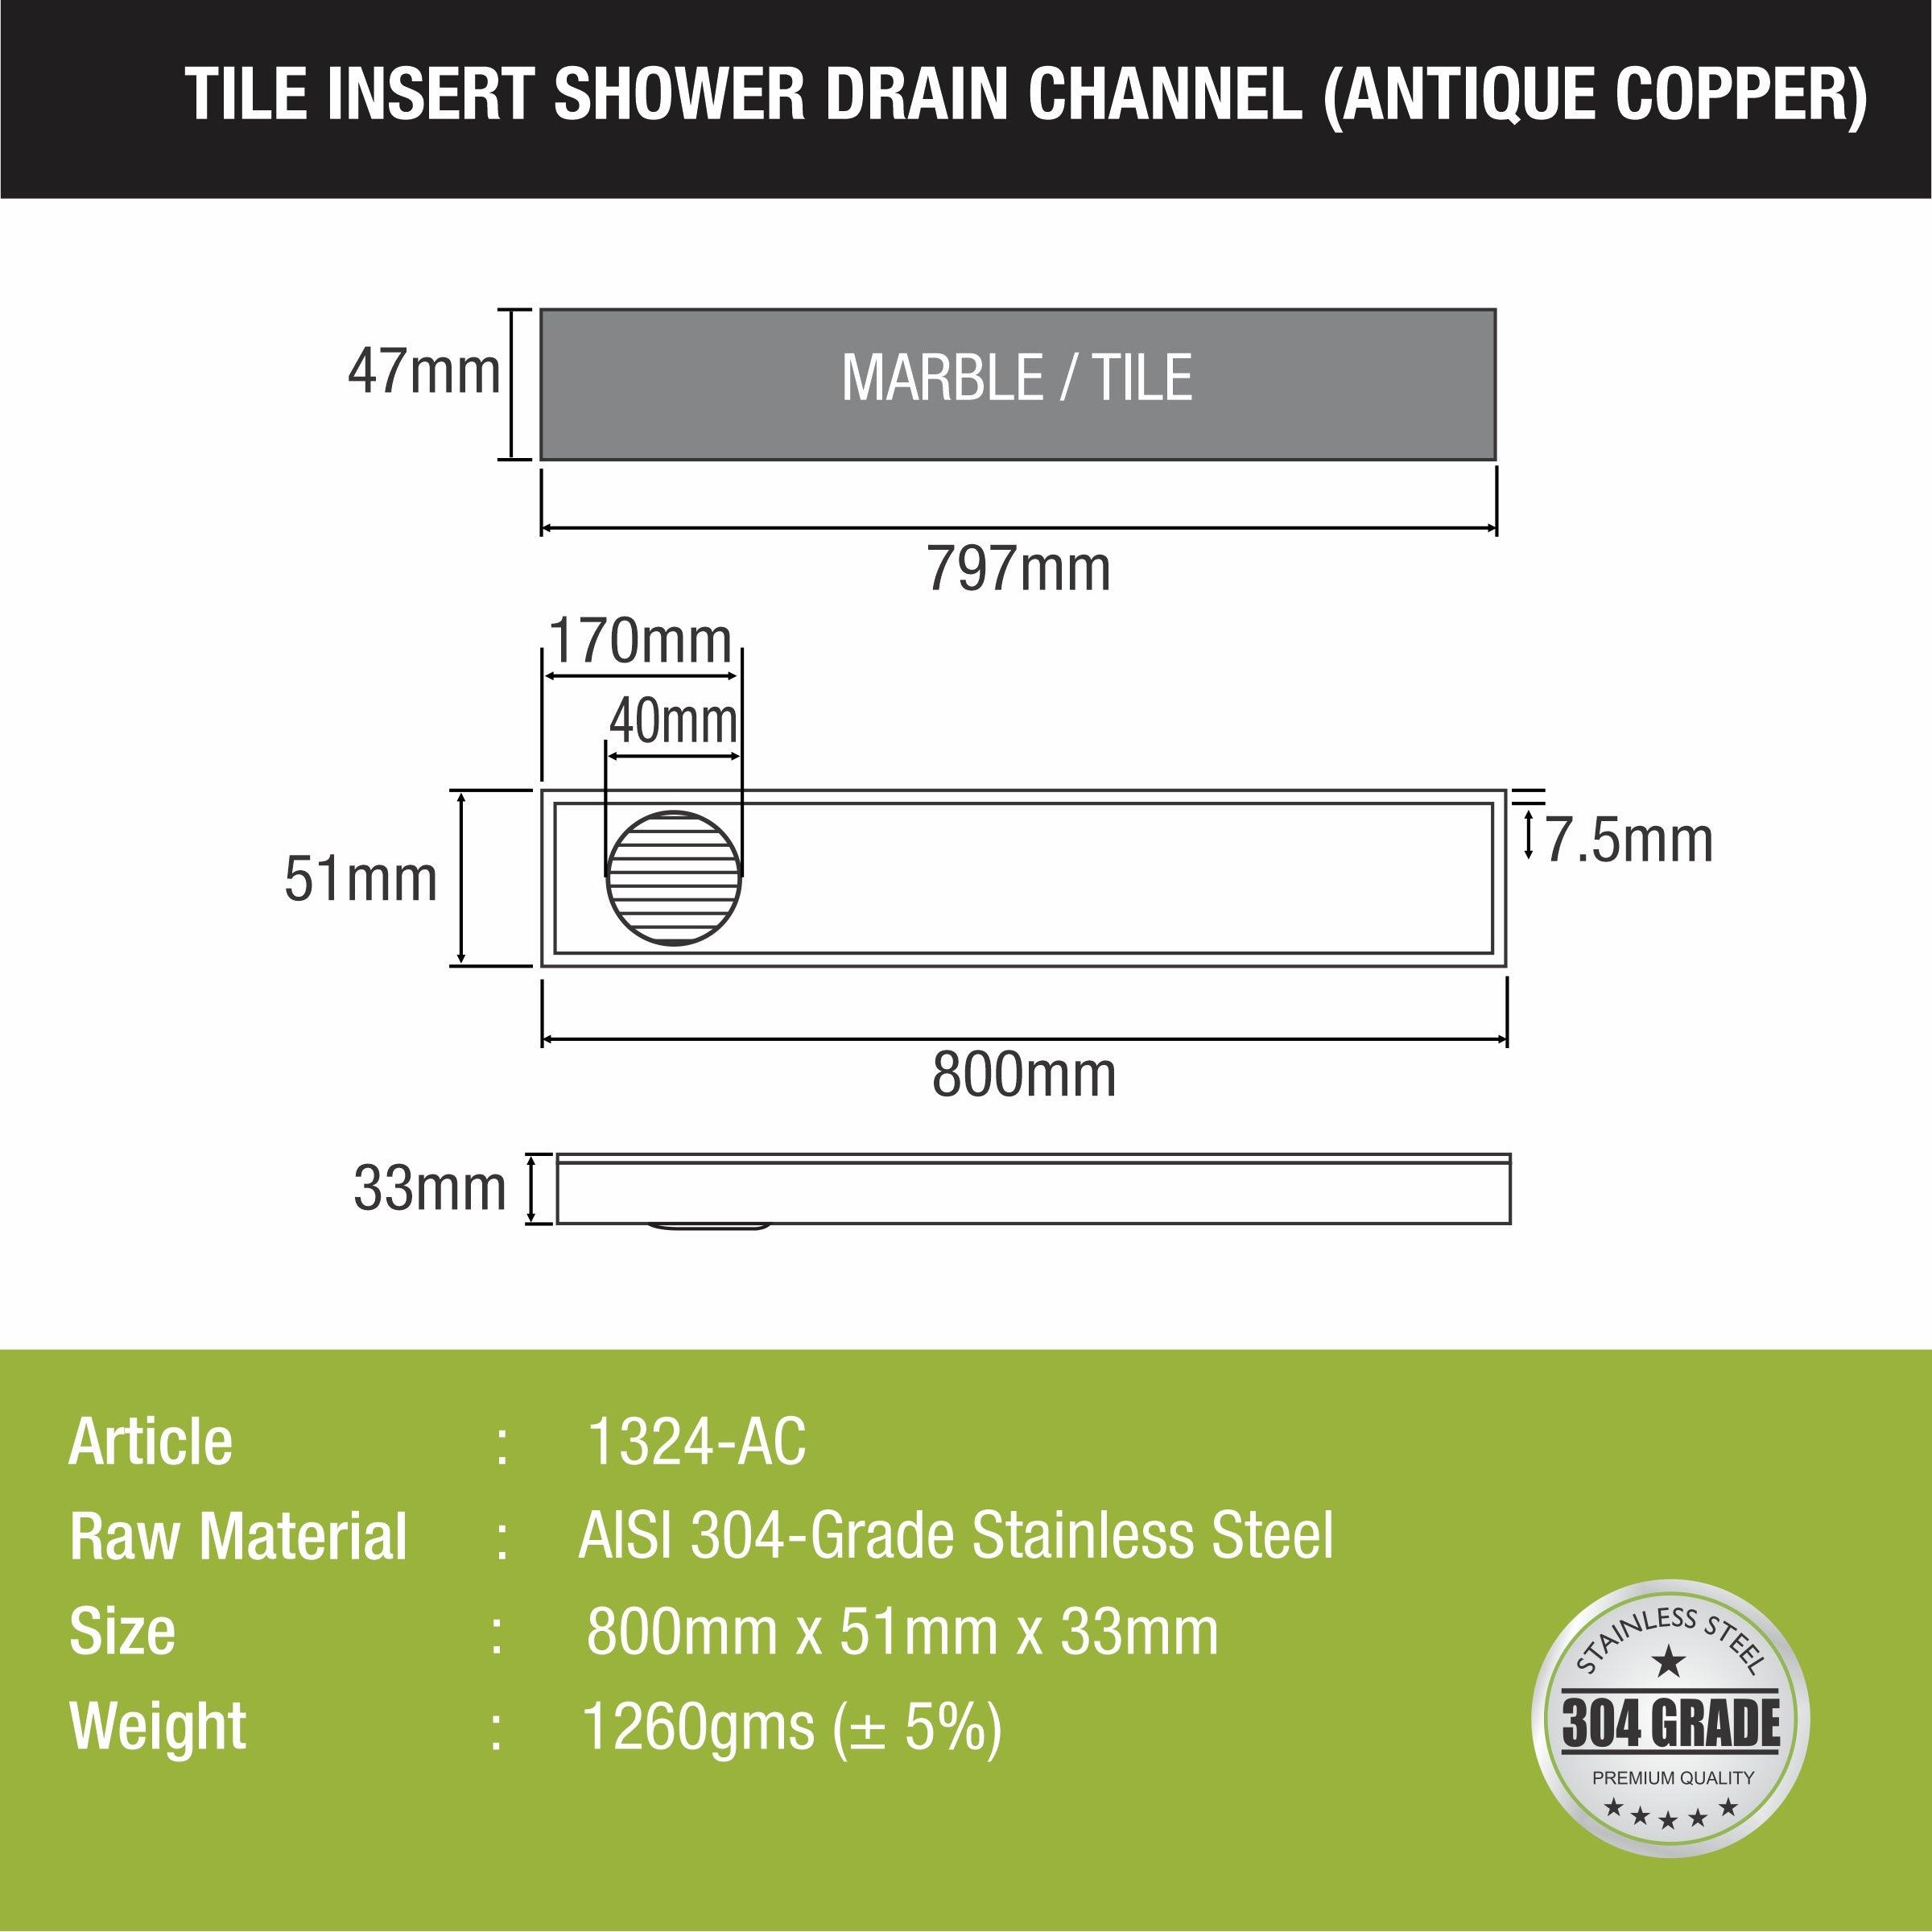 Tile Insert Shower Drain Channel - Antique Copper (32 x 2 Inches) sizes and dimensions